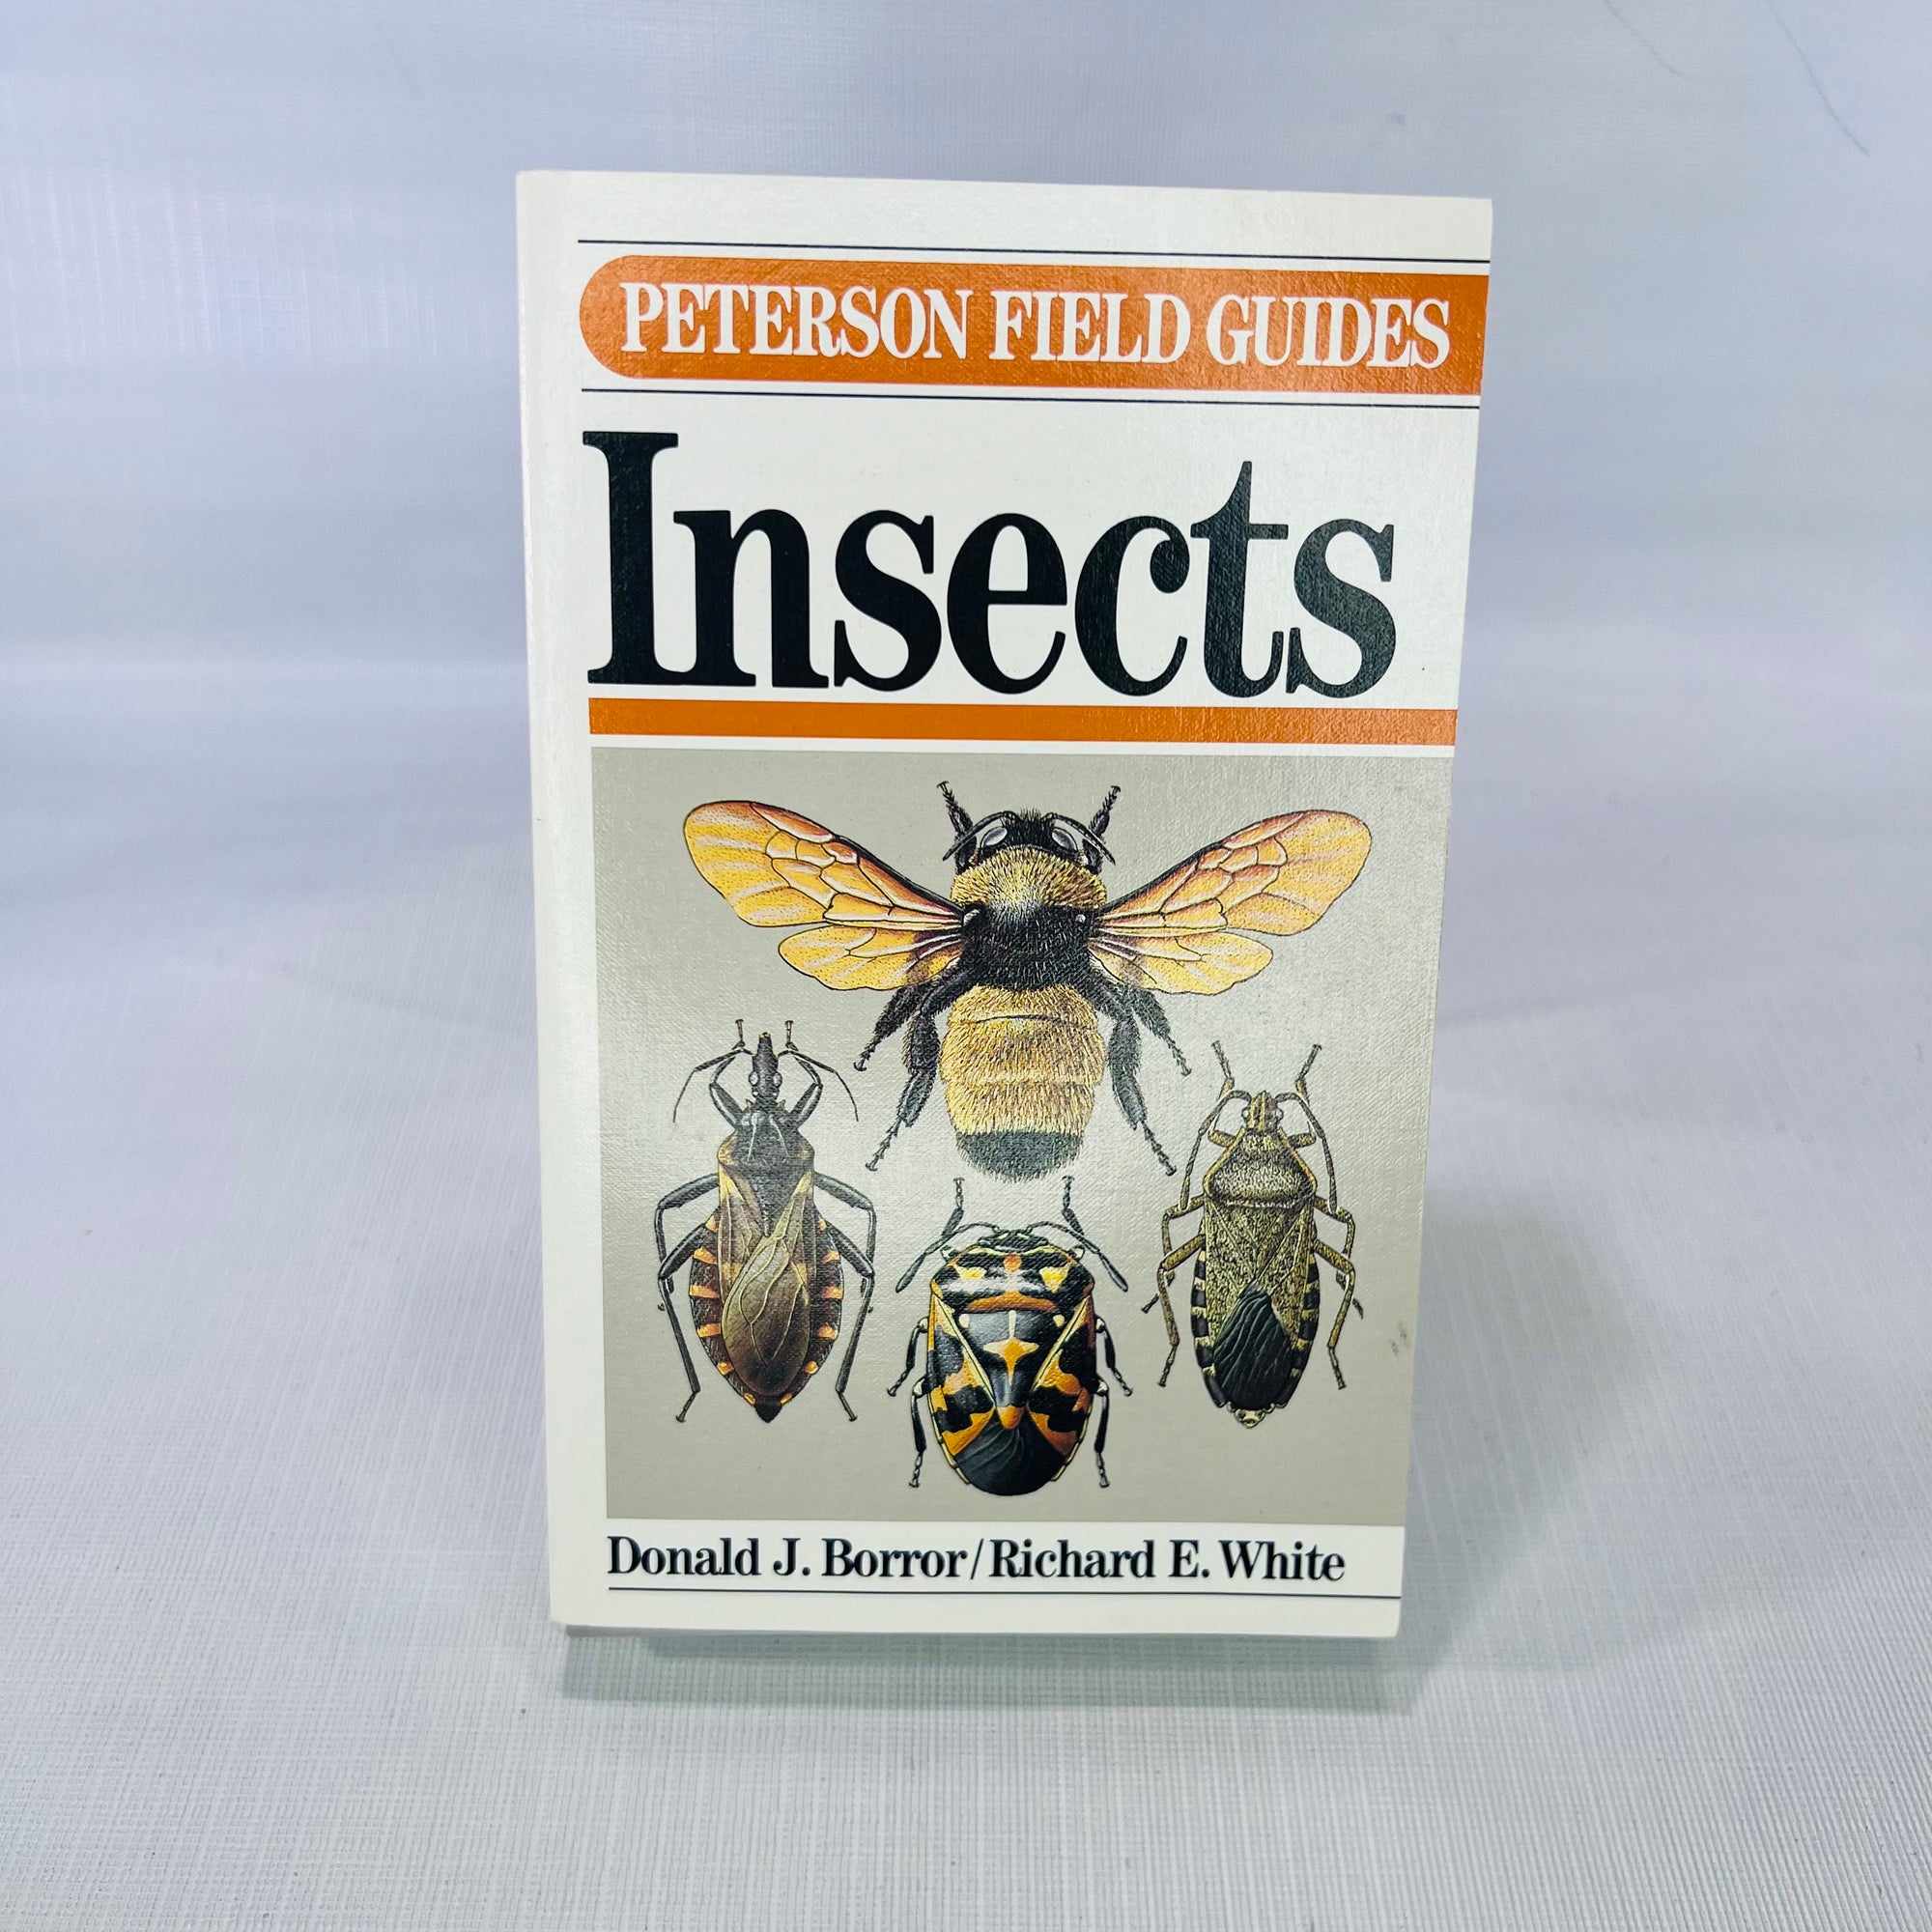 Insects by Donald J. Borror 1977 Part of the Peterson Field Guides Houghton Miffin Company